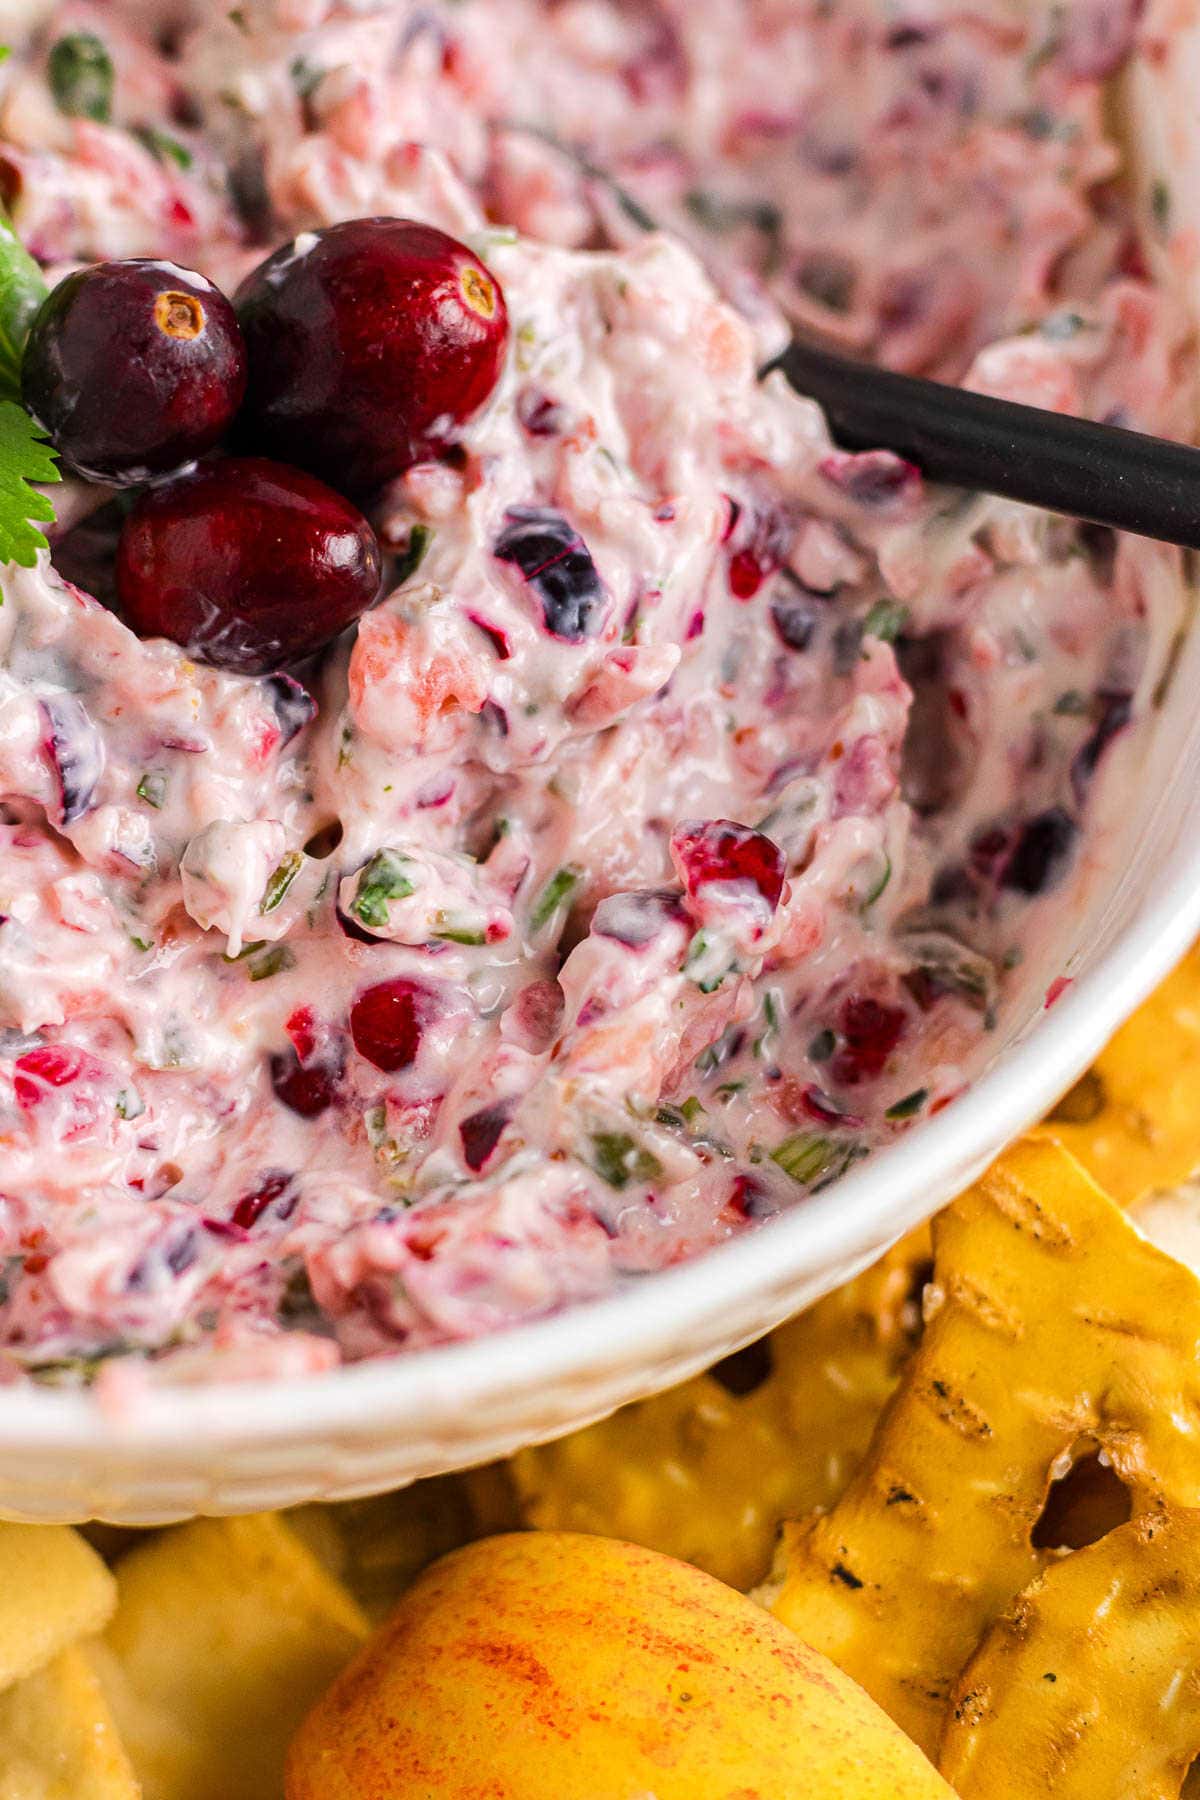 An up-close photo of cranberry jalapeno dip in a white bowl, showing the texture of the dip.